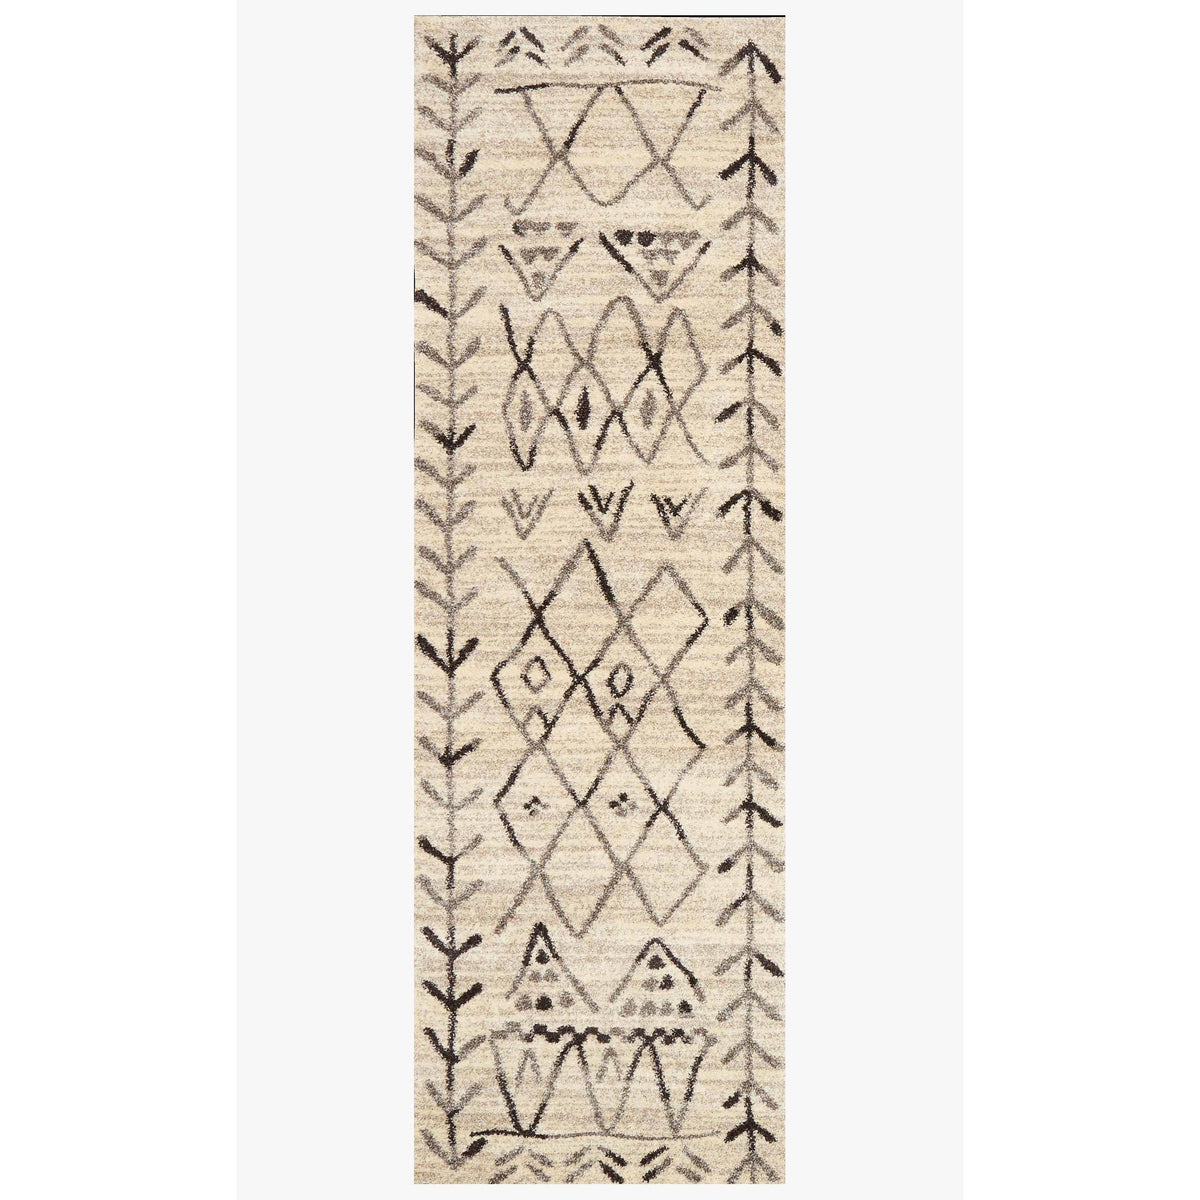 Emory Rugs by Loloi - EB-09 Heather Gray / Black-Loloi Rugs-Blue Hand Home